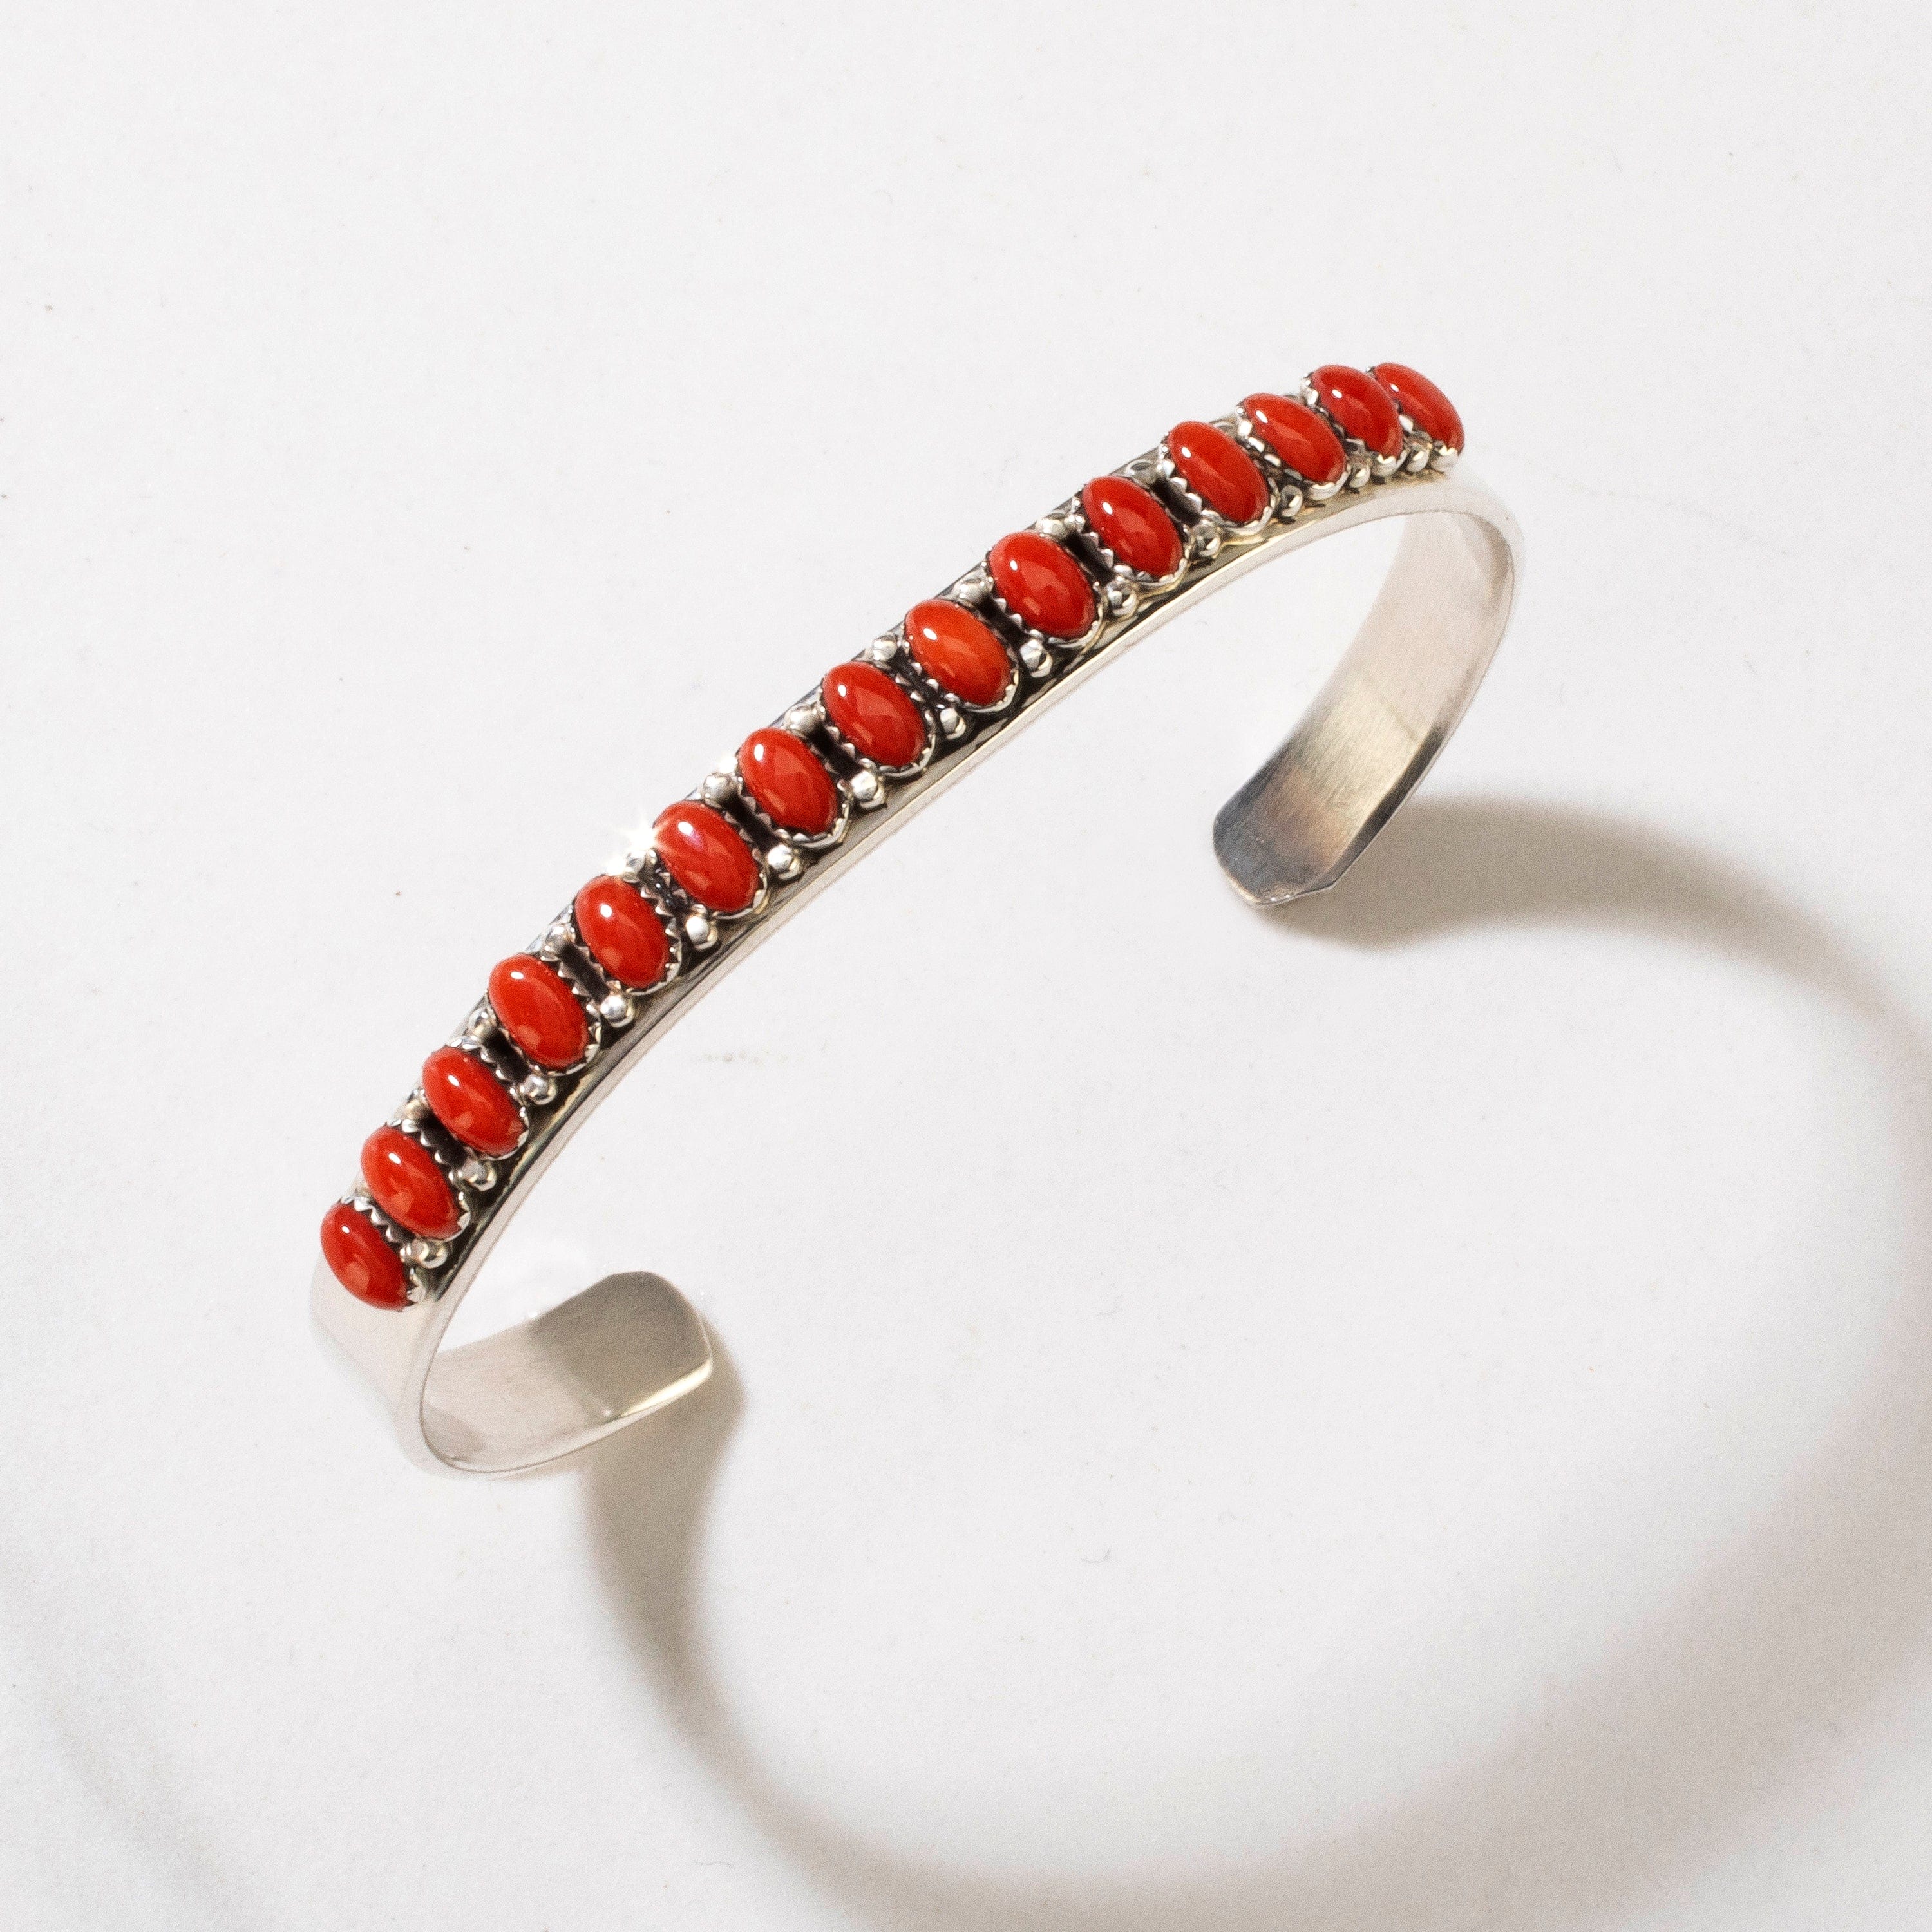 Kalifano Native American Jewelry Patrick Yazzie Navajo Red Coral USA Native American Made 925 Sterling Silver Cuff NAB1200.018